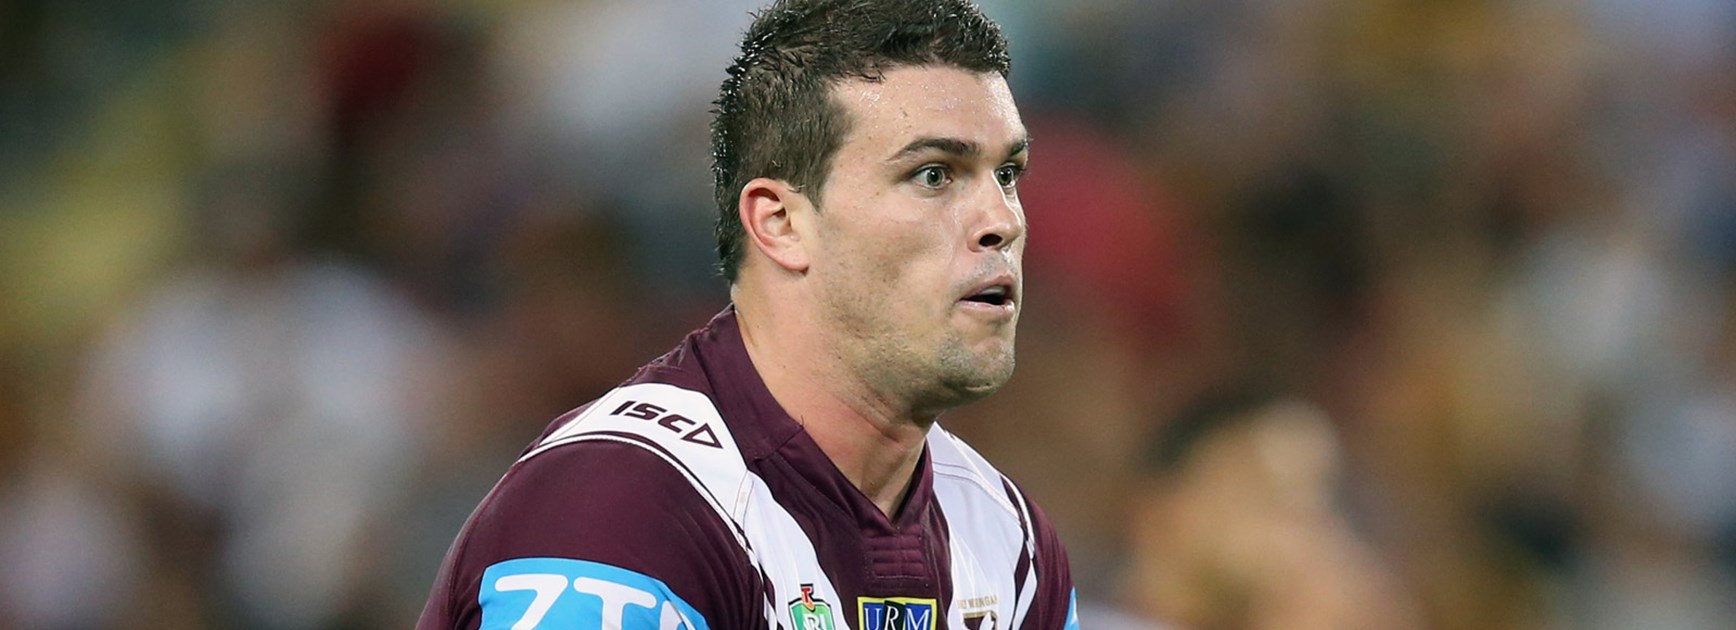 Manly prop Darcy Lussick charges forward against the Broncos.